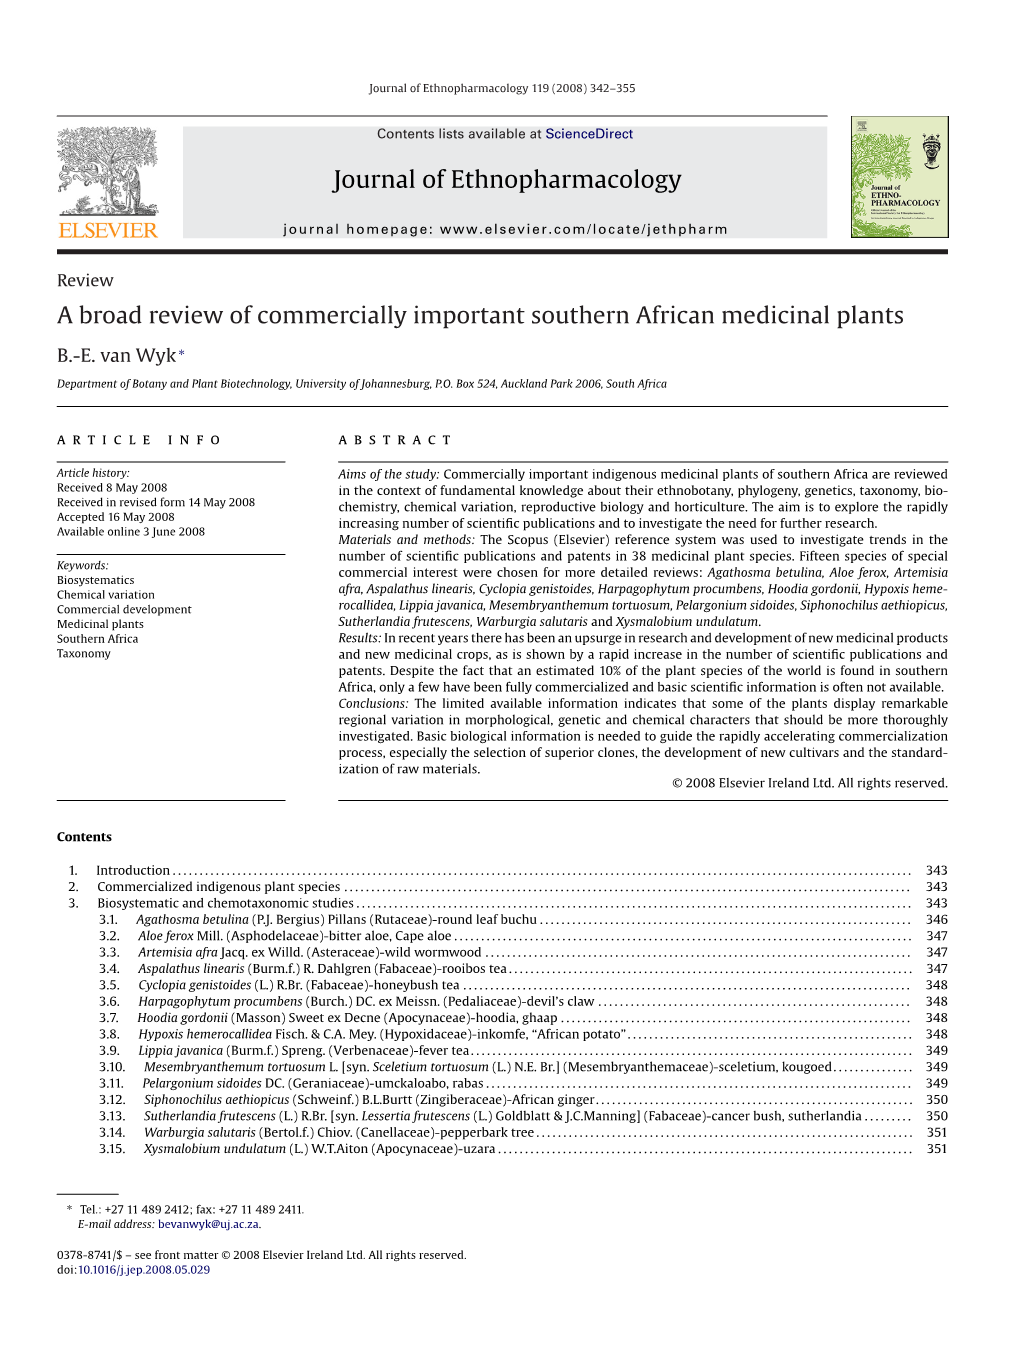 Journal of Ethnopharmacology a Broad Review of Commercially Important Southern African Medicinal Plants